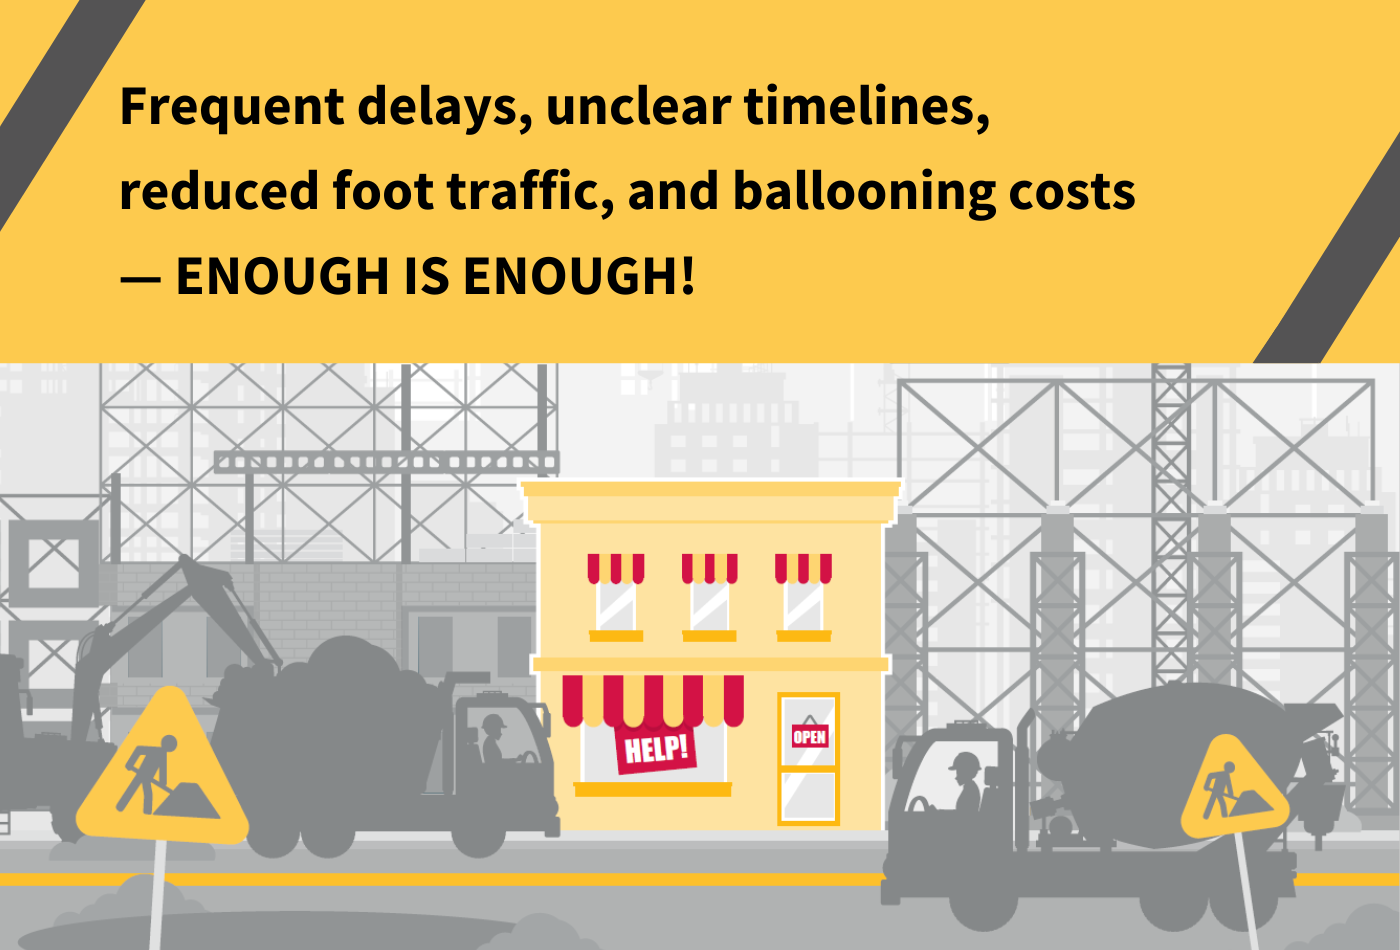 Frequent delays, unclear timelines, reduced foot traffic, and ballooning costs — ENOUGH IS ENOUGH!